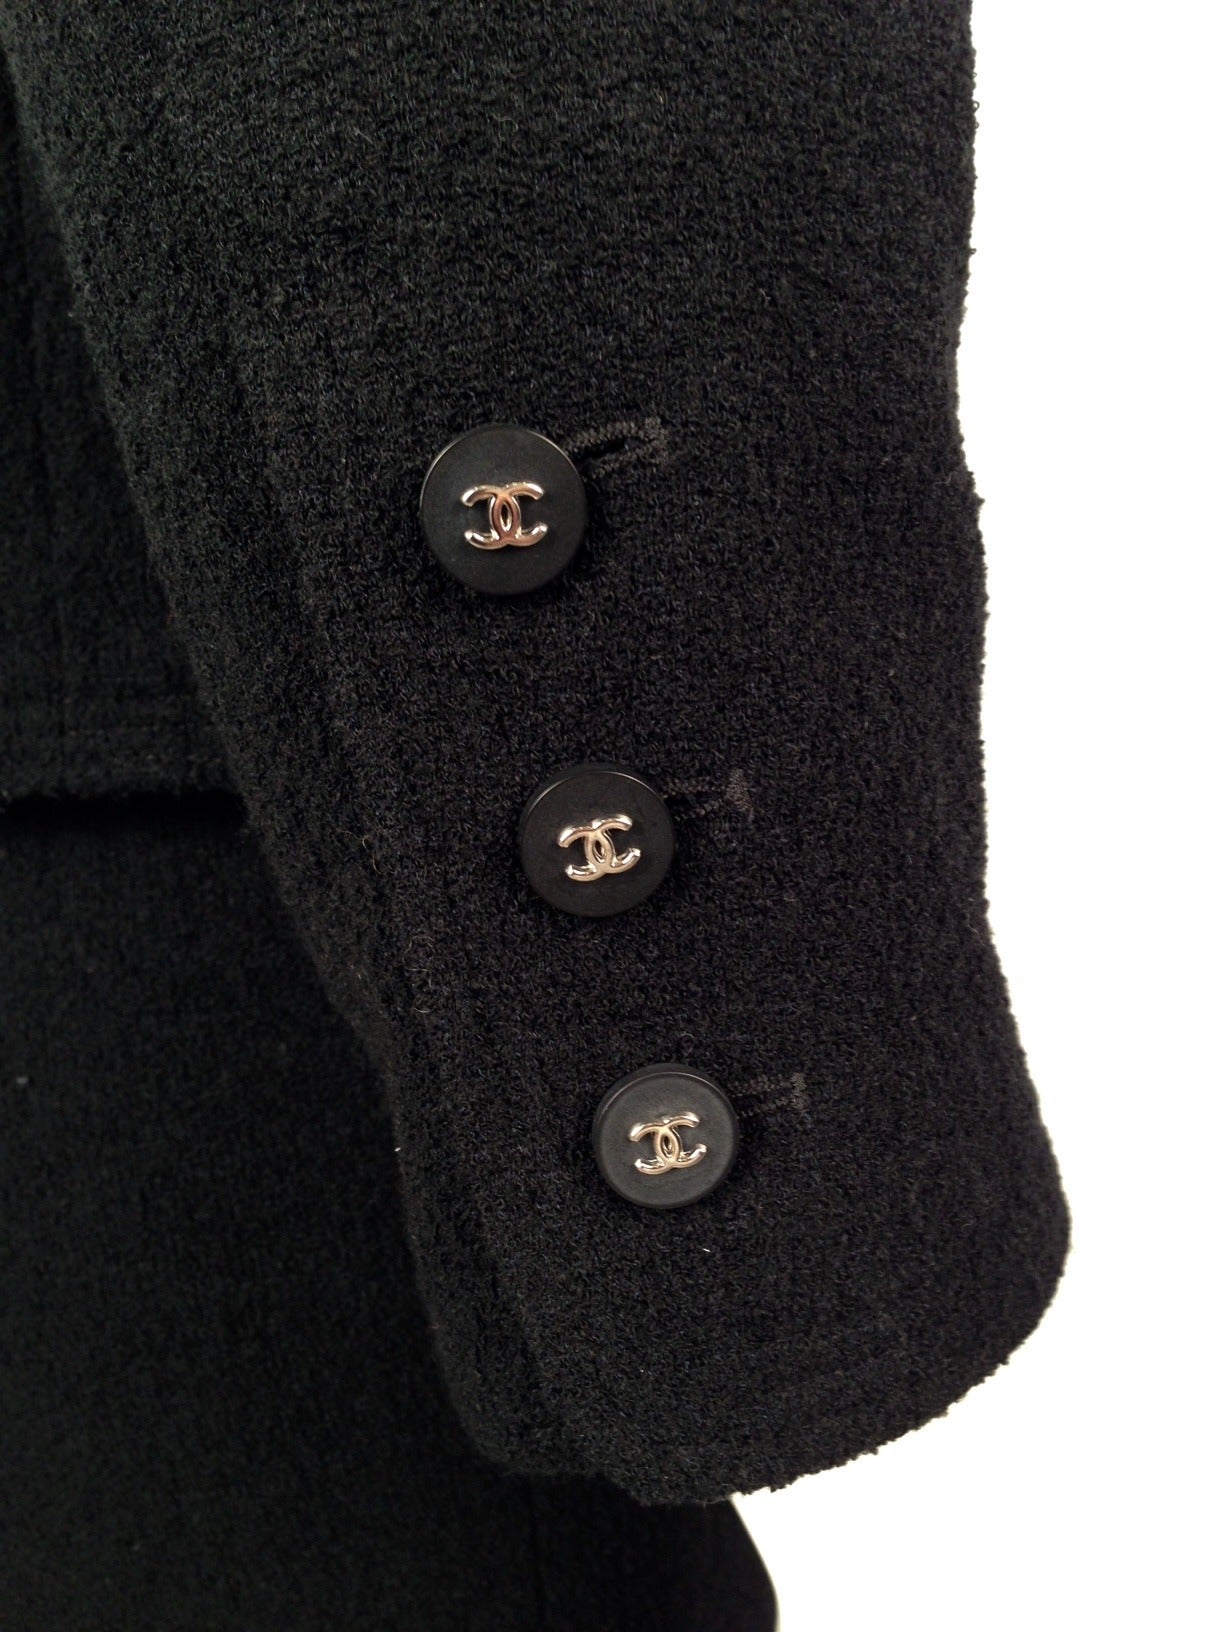 1990s Chanel Black Boucle Skirt Suit In Excellent Condition For Sale In Palm Beach, FL